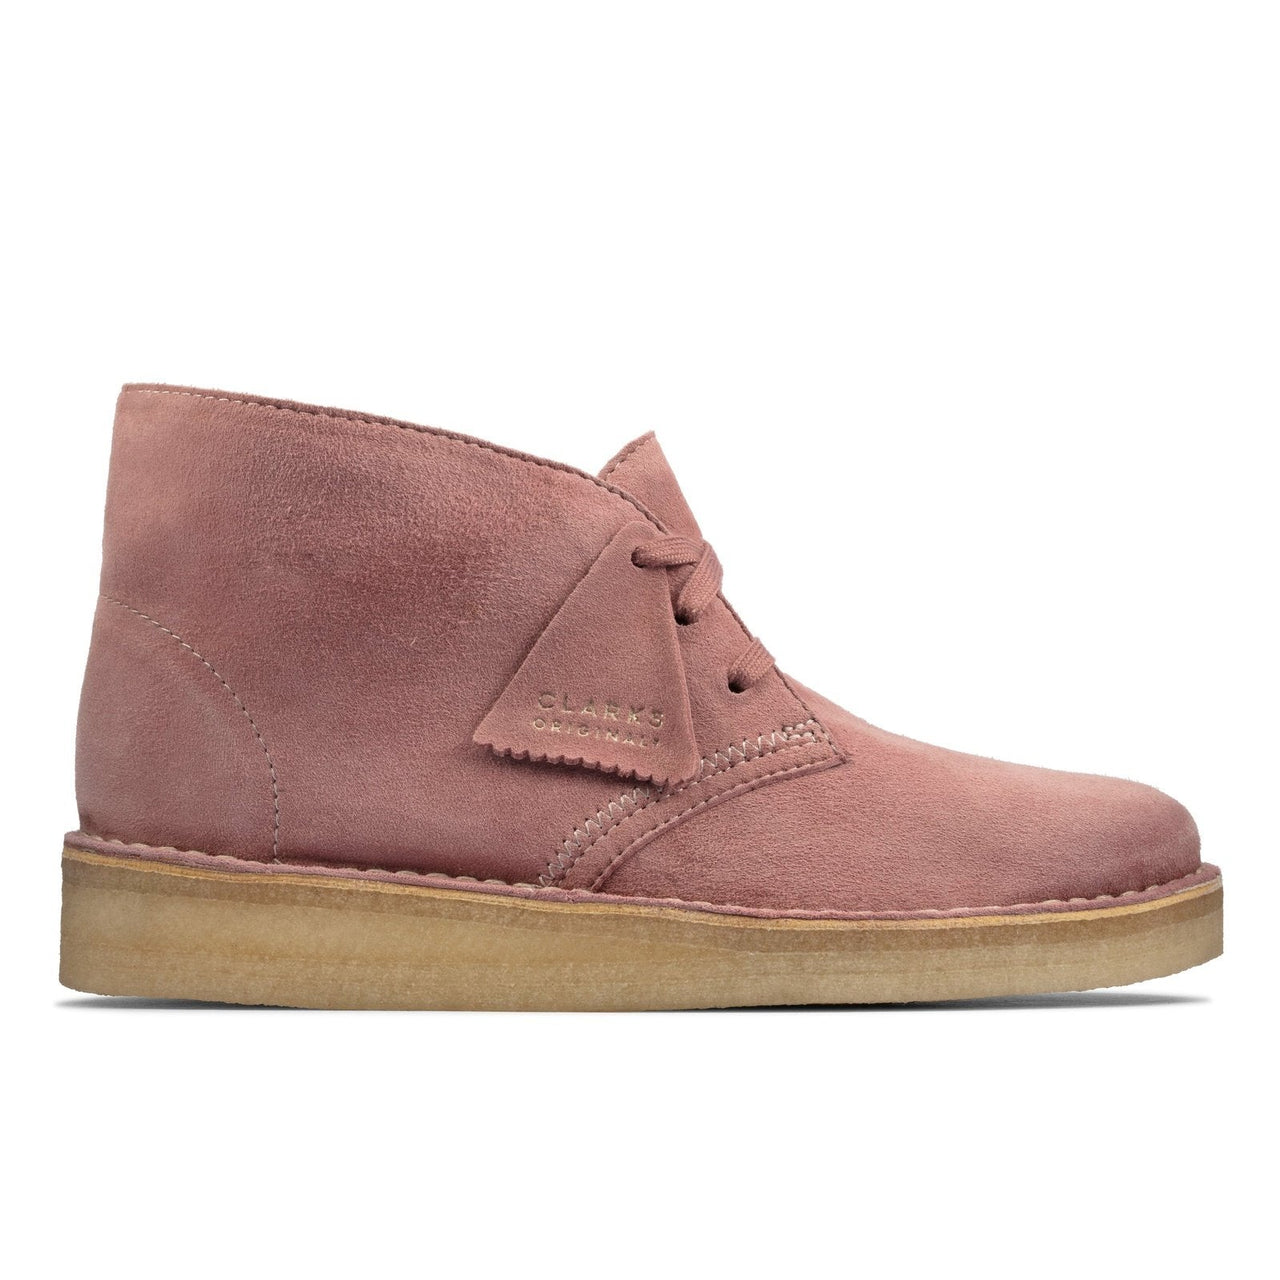 Clarks Womens Desert Coal Shoes Dusty Pink Suede